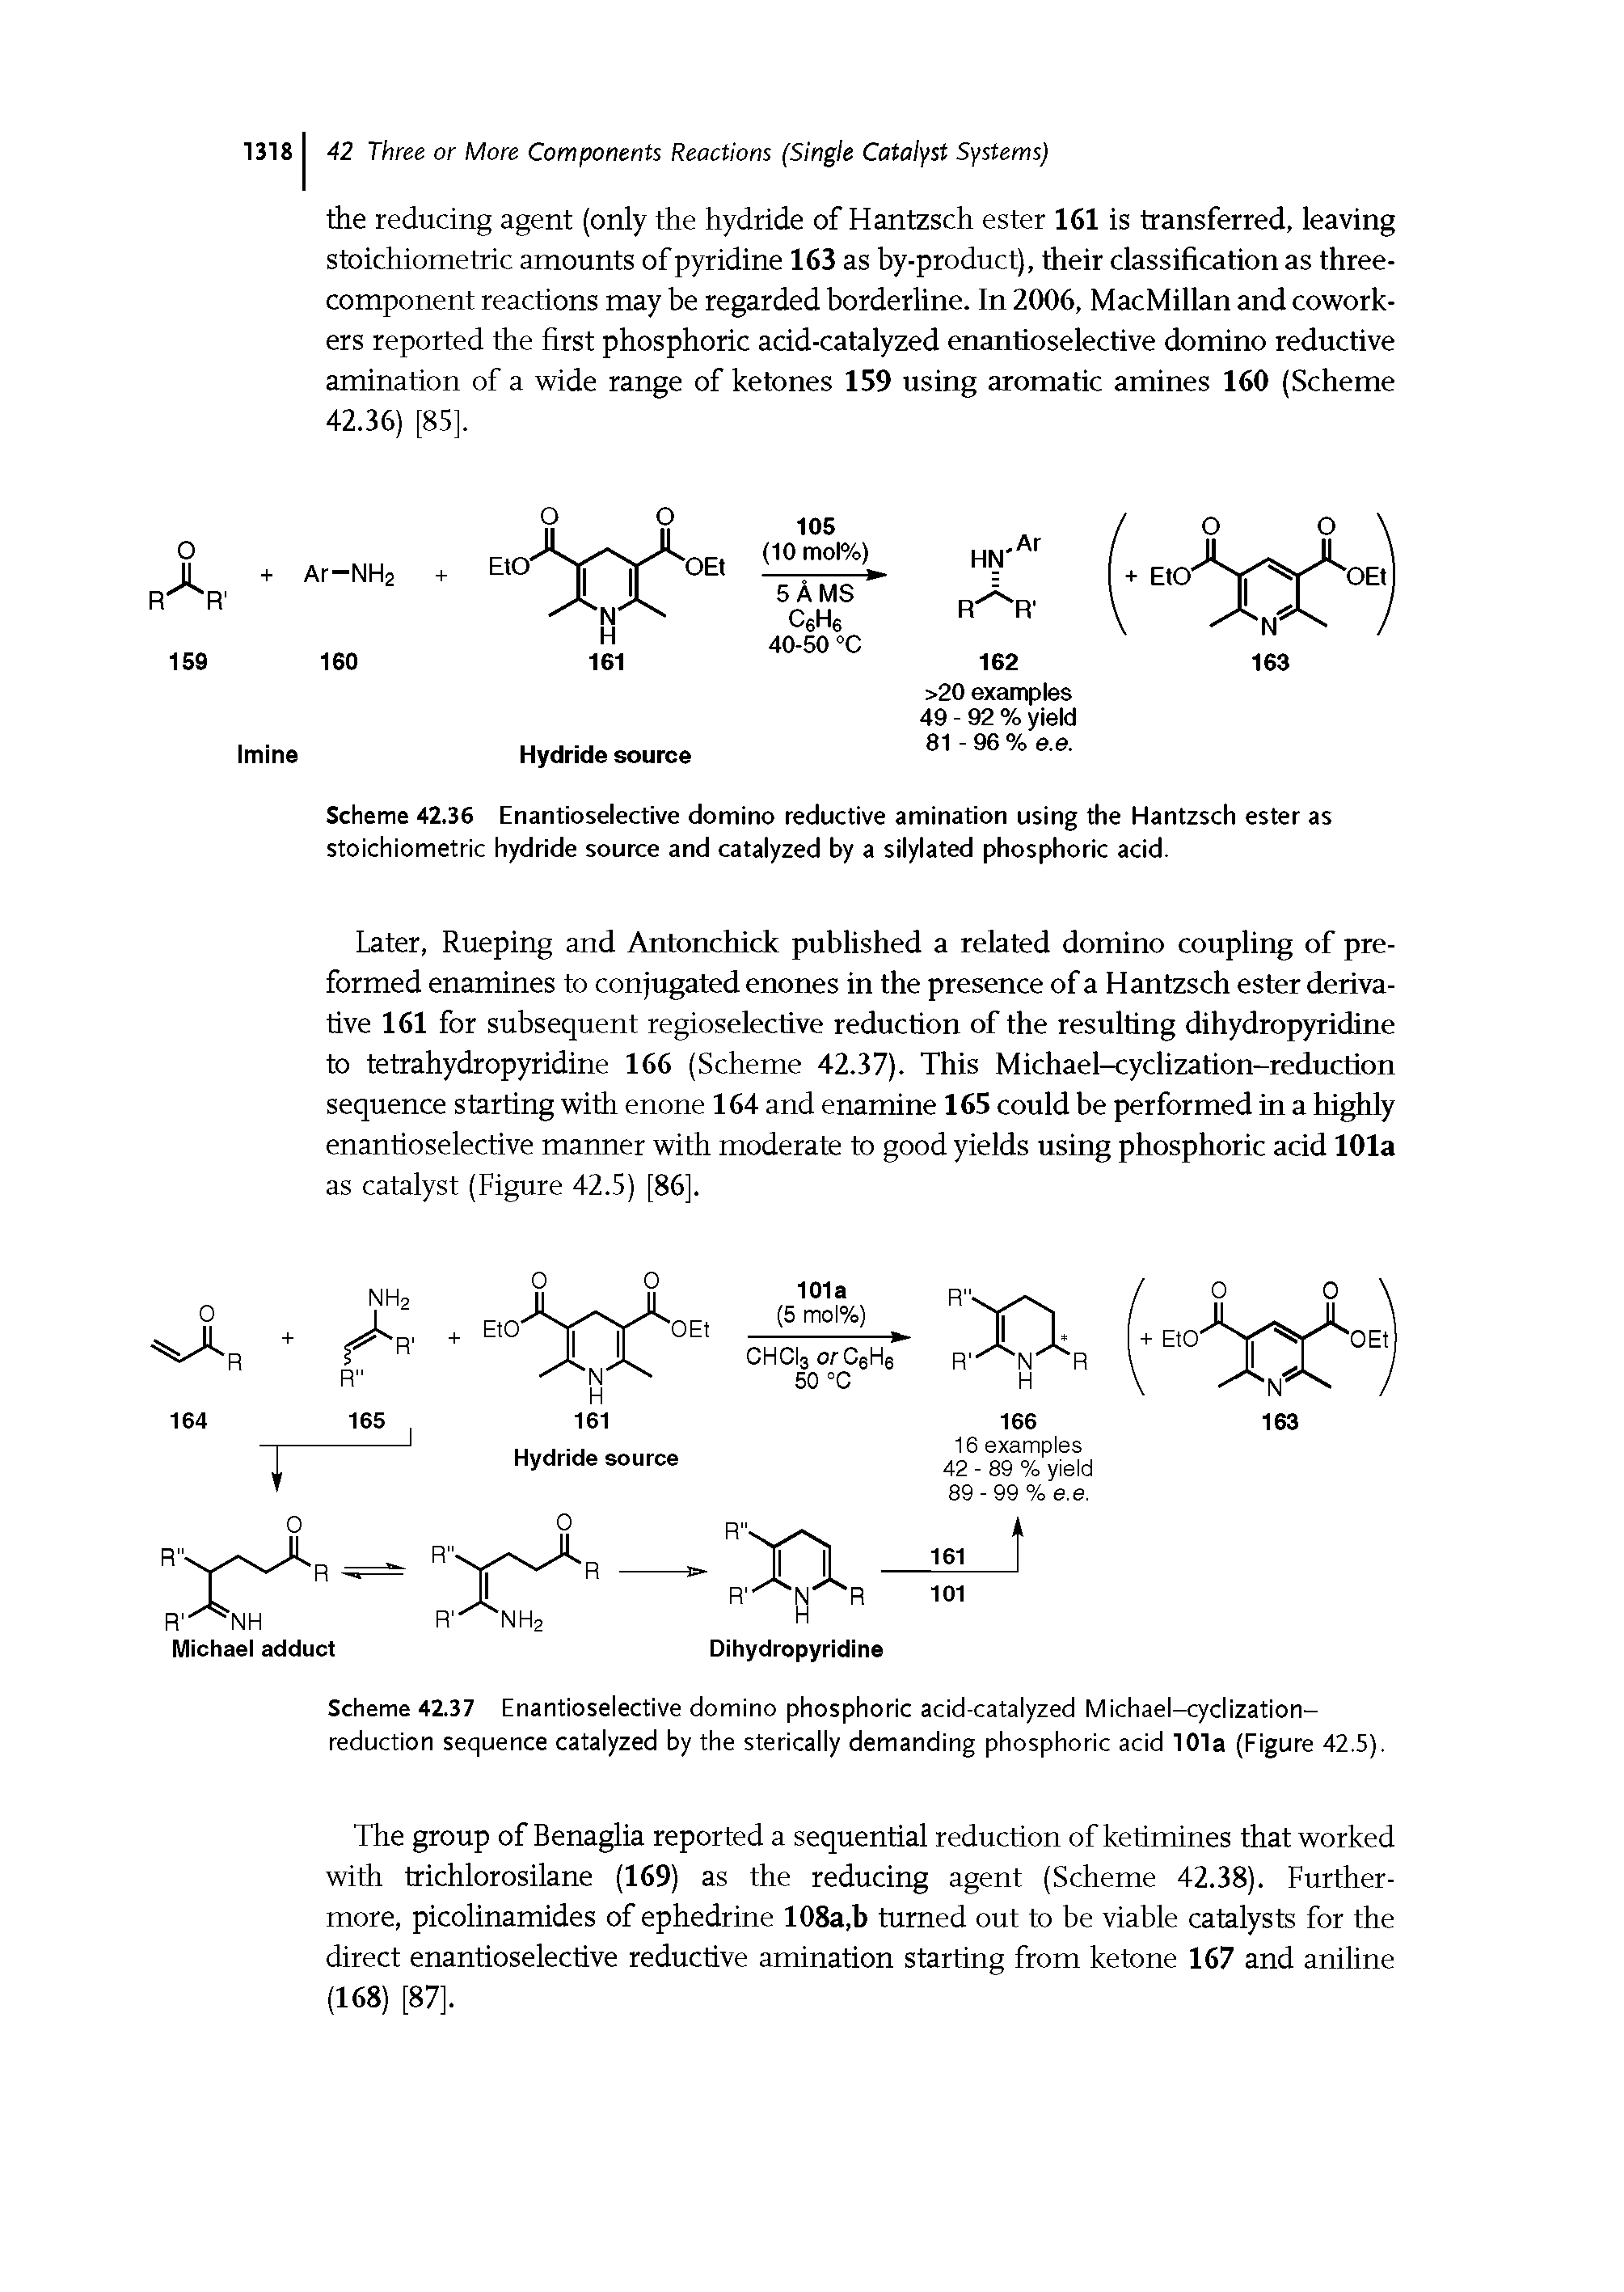 Scheme 42.36 Enantioselective domino reductive amination using the Hantzsch ester as stoichiometric hydride source and catalyzed by a silylated phosphoric acid.